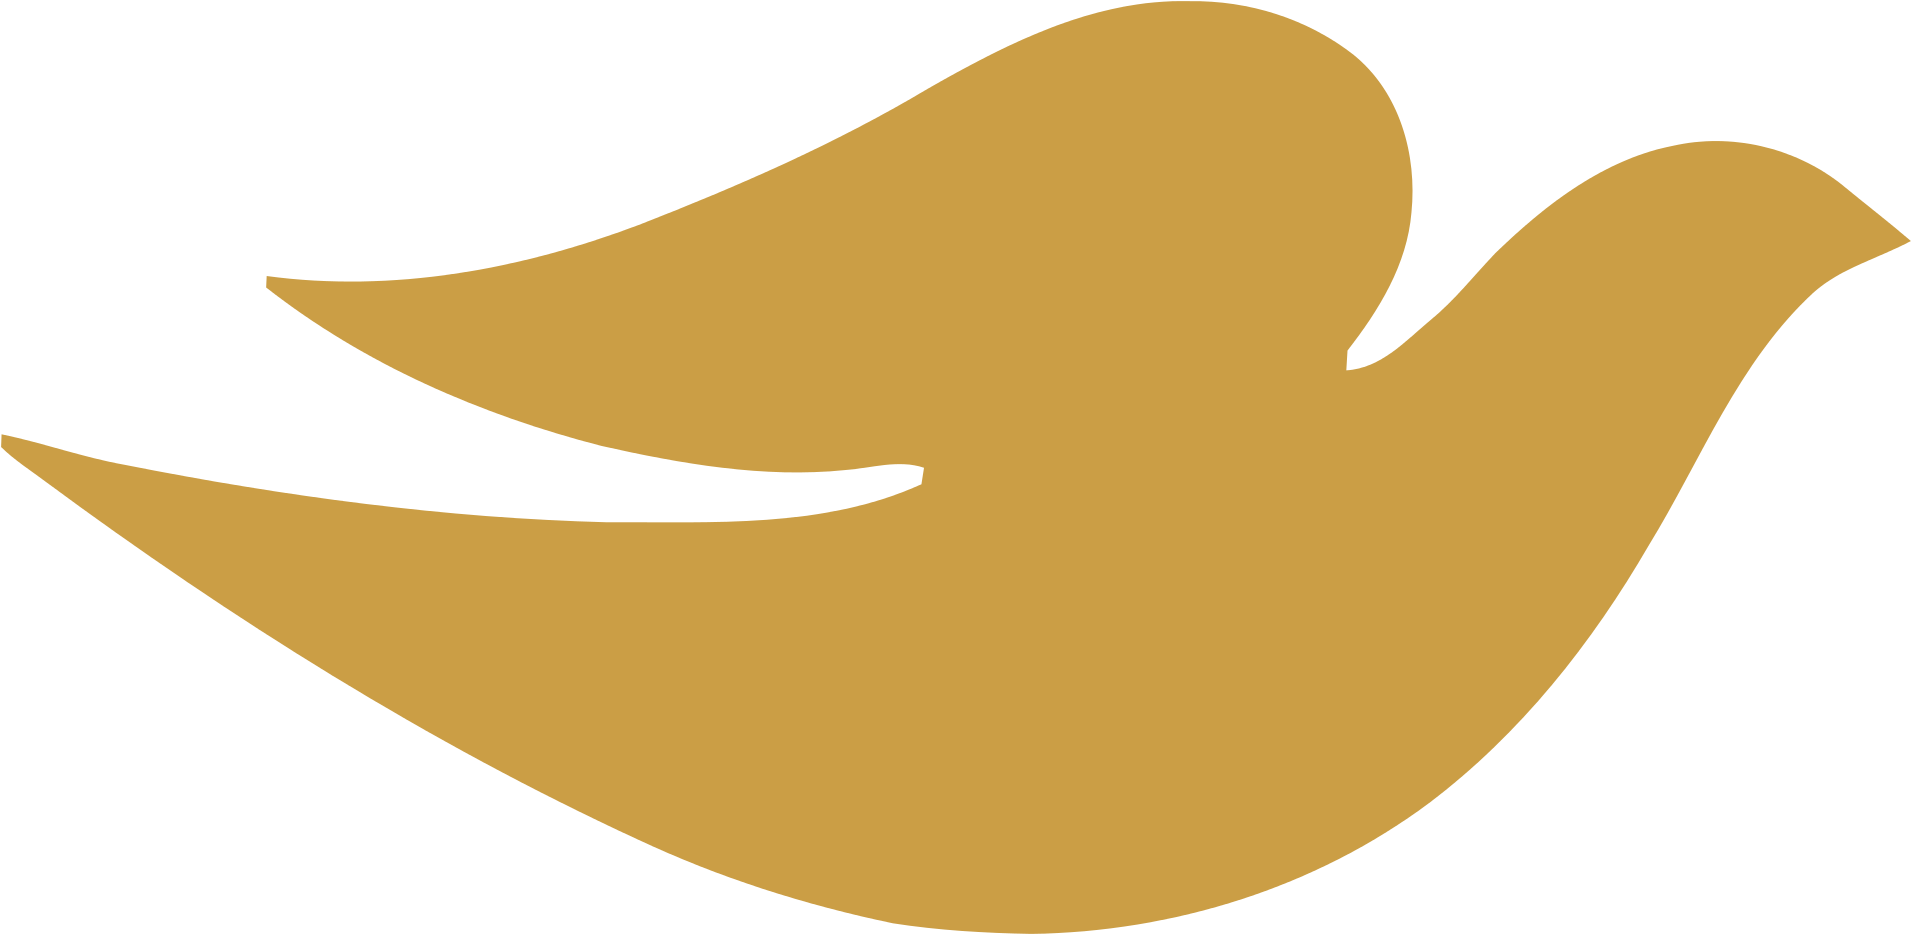 Download File - Dove Dove - Svg - Dove Logo PNG Image with No ...